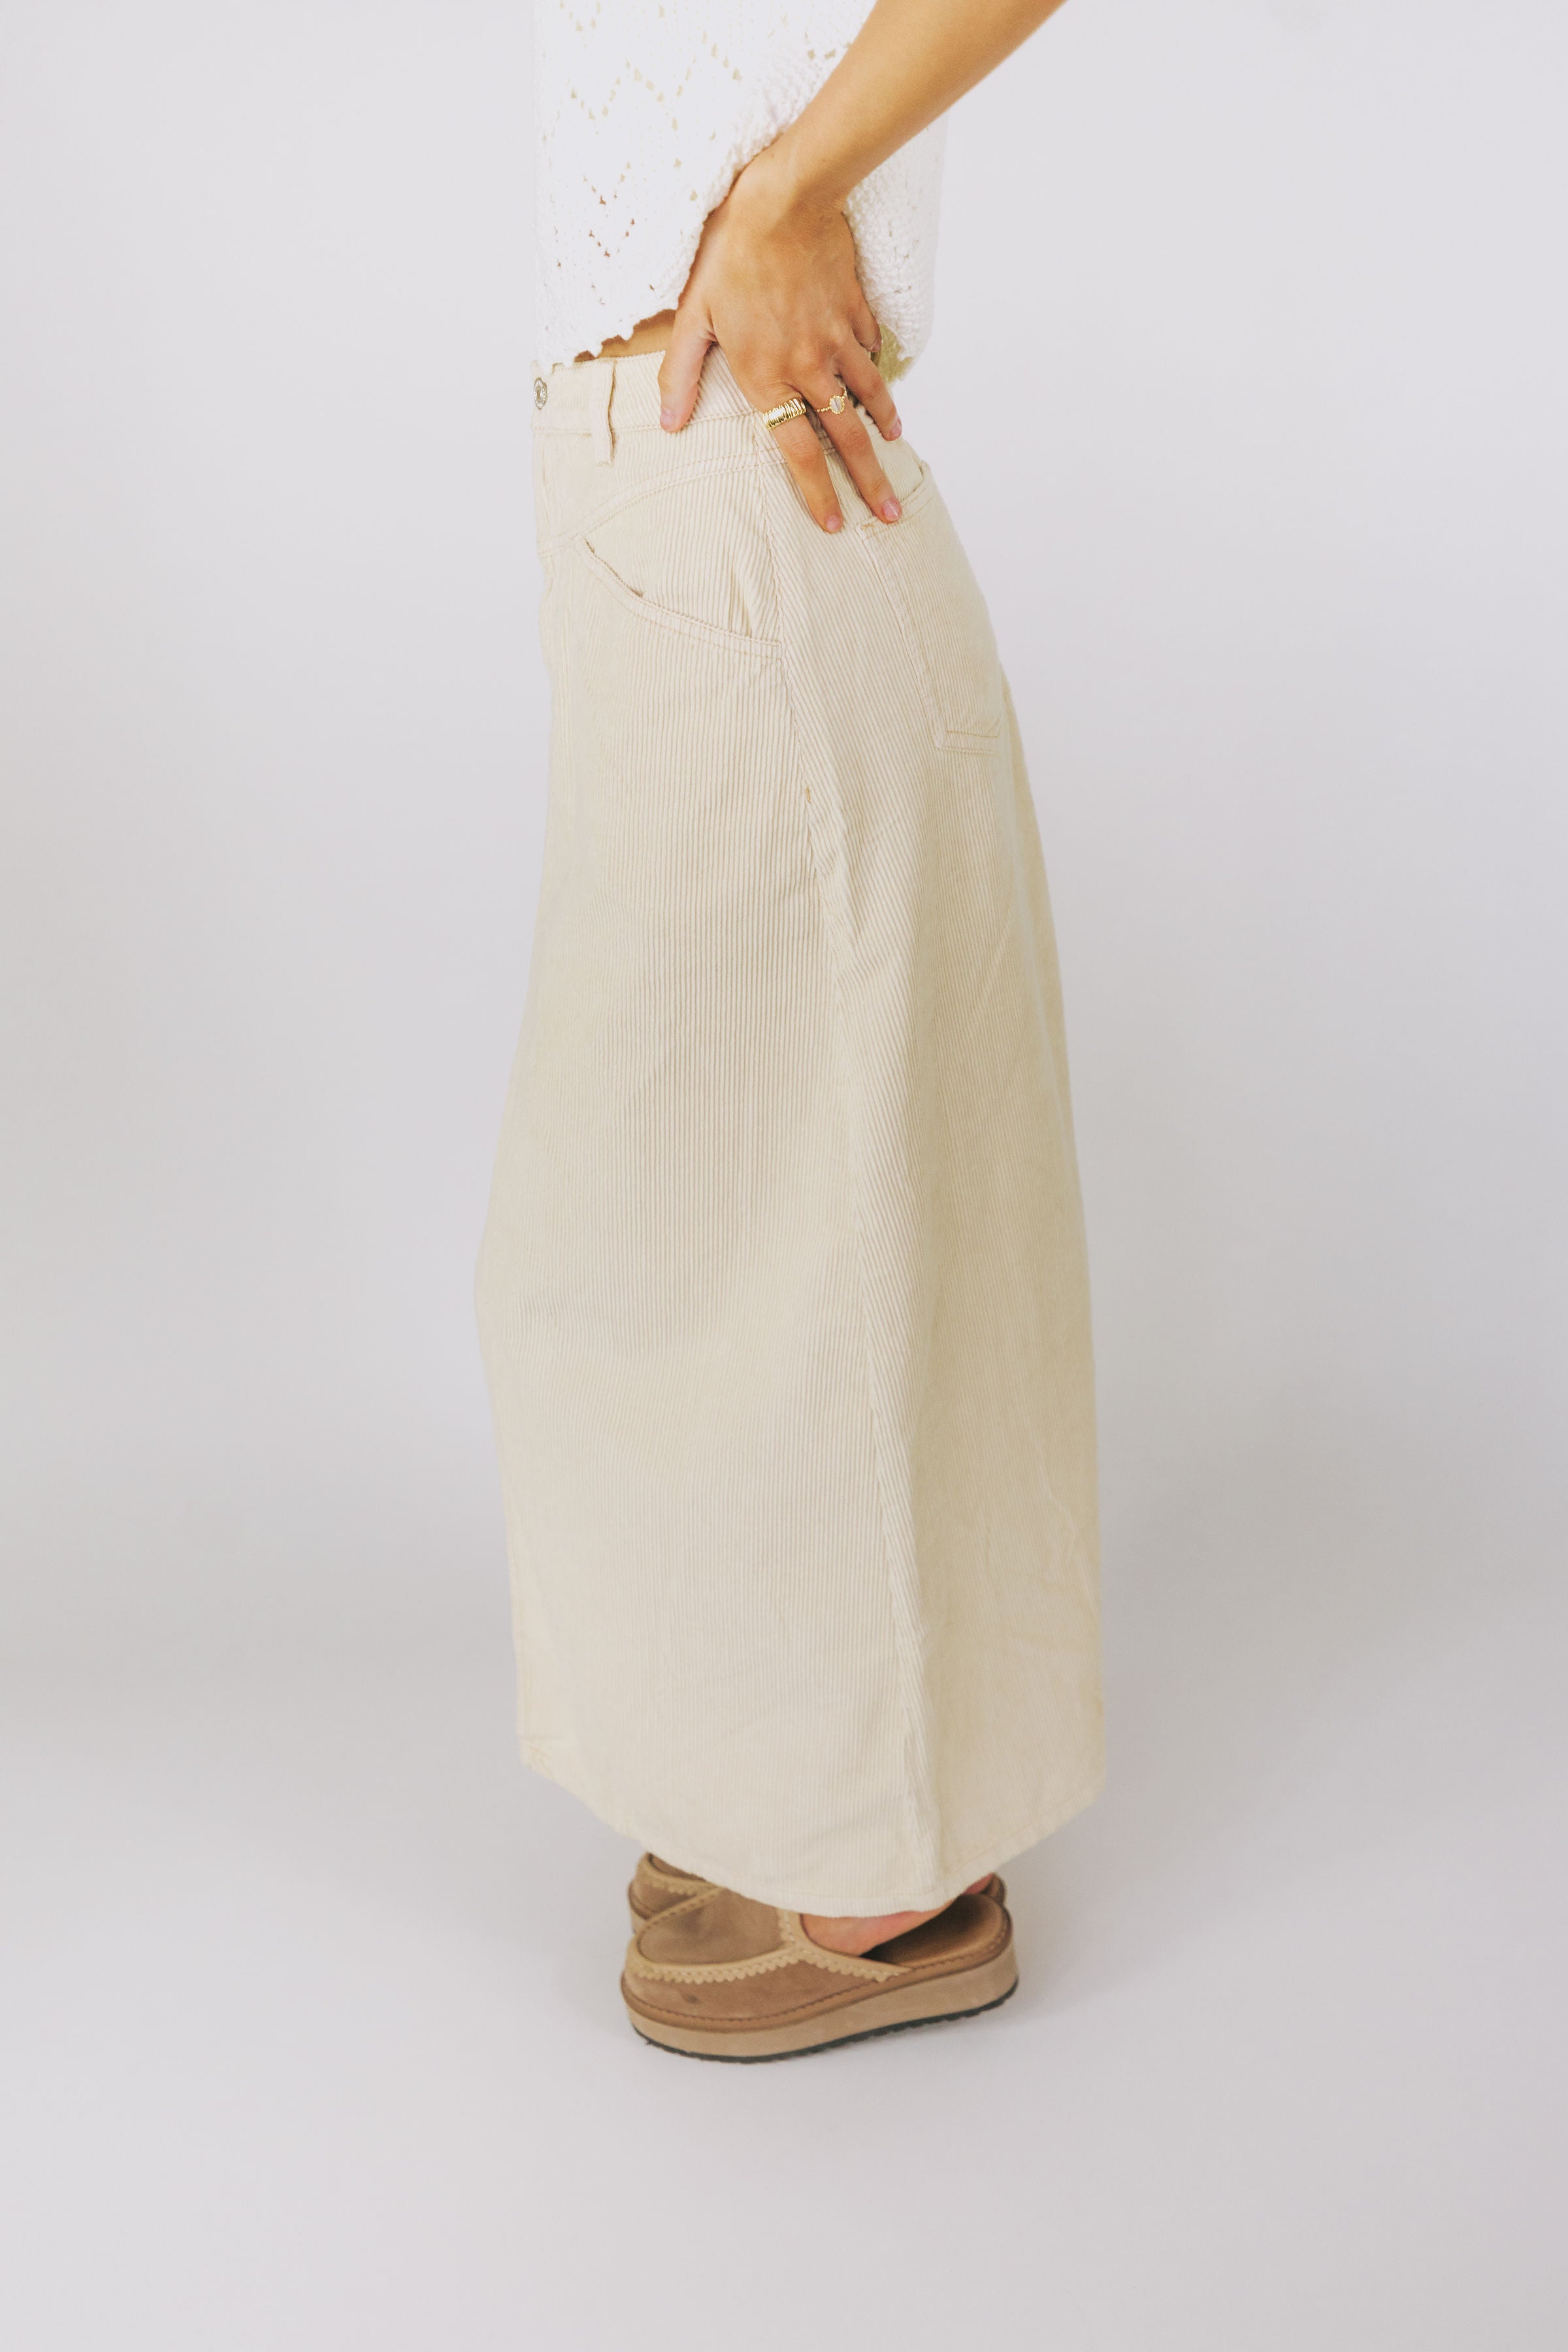 FREE PEOPLE - Come As You Are Cord Maxi Skirt